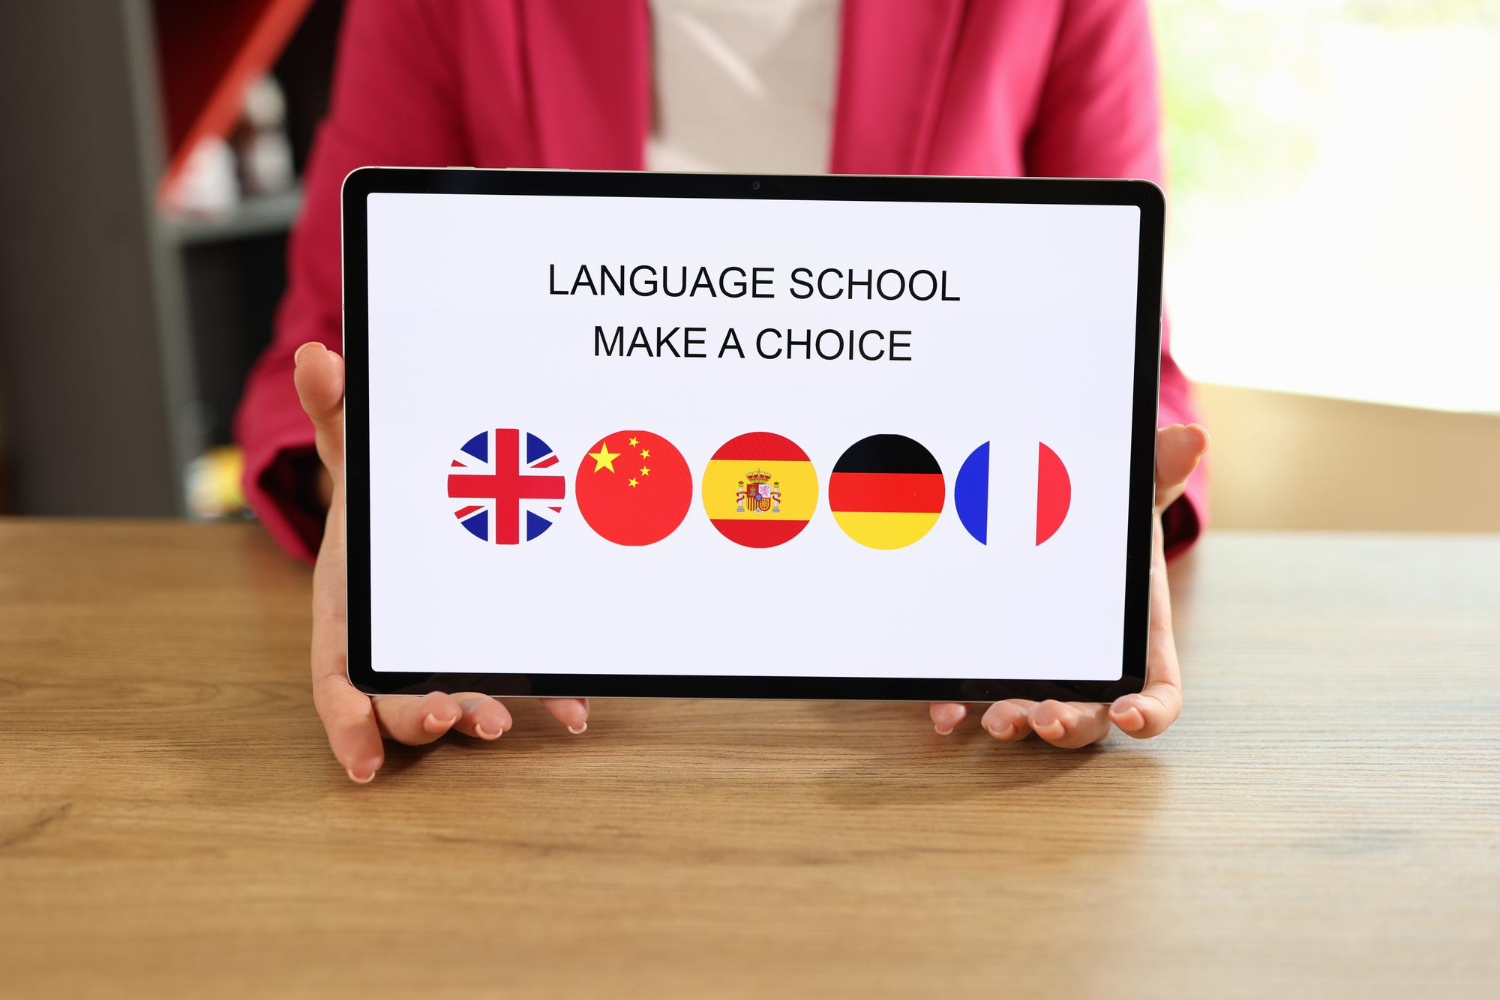 Woman-holds-tablet-with-text-language-school-and-offers-to-choose-foreign-language-to-study